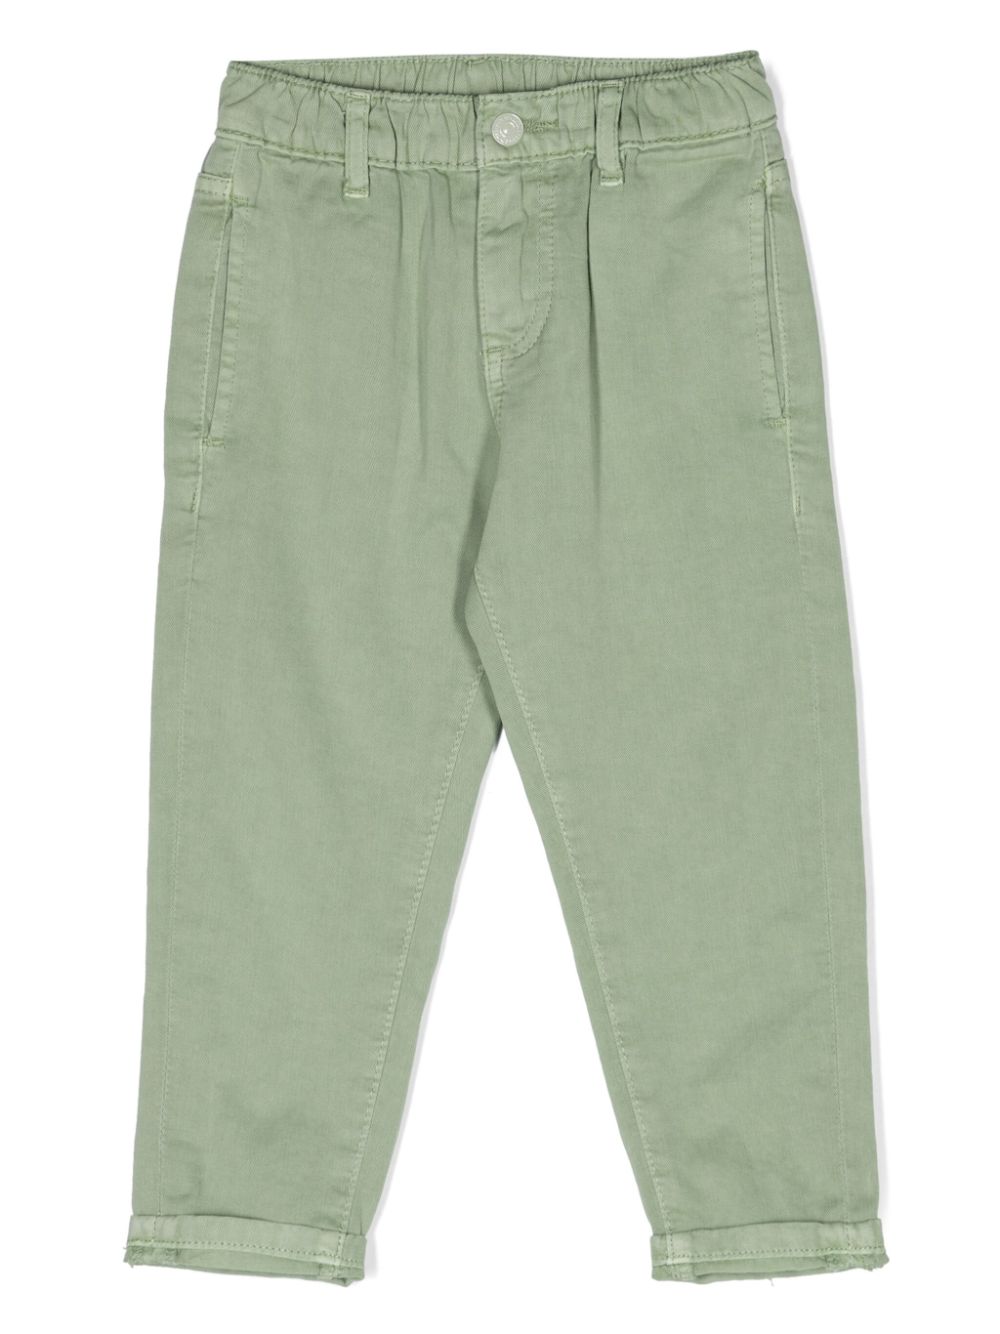 Guess kids mid-rise skinny jeans Groen